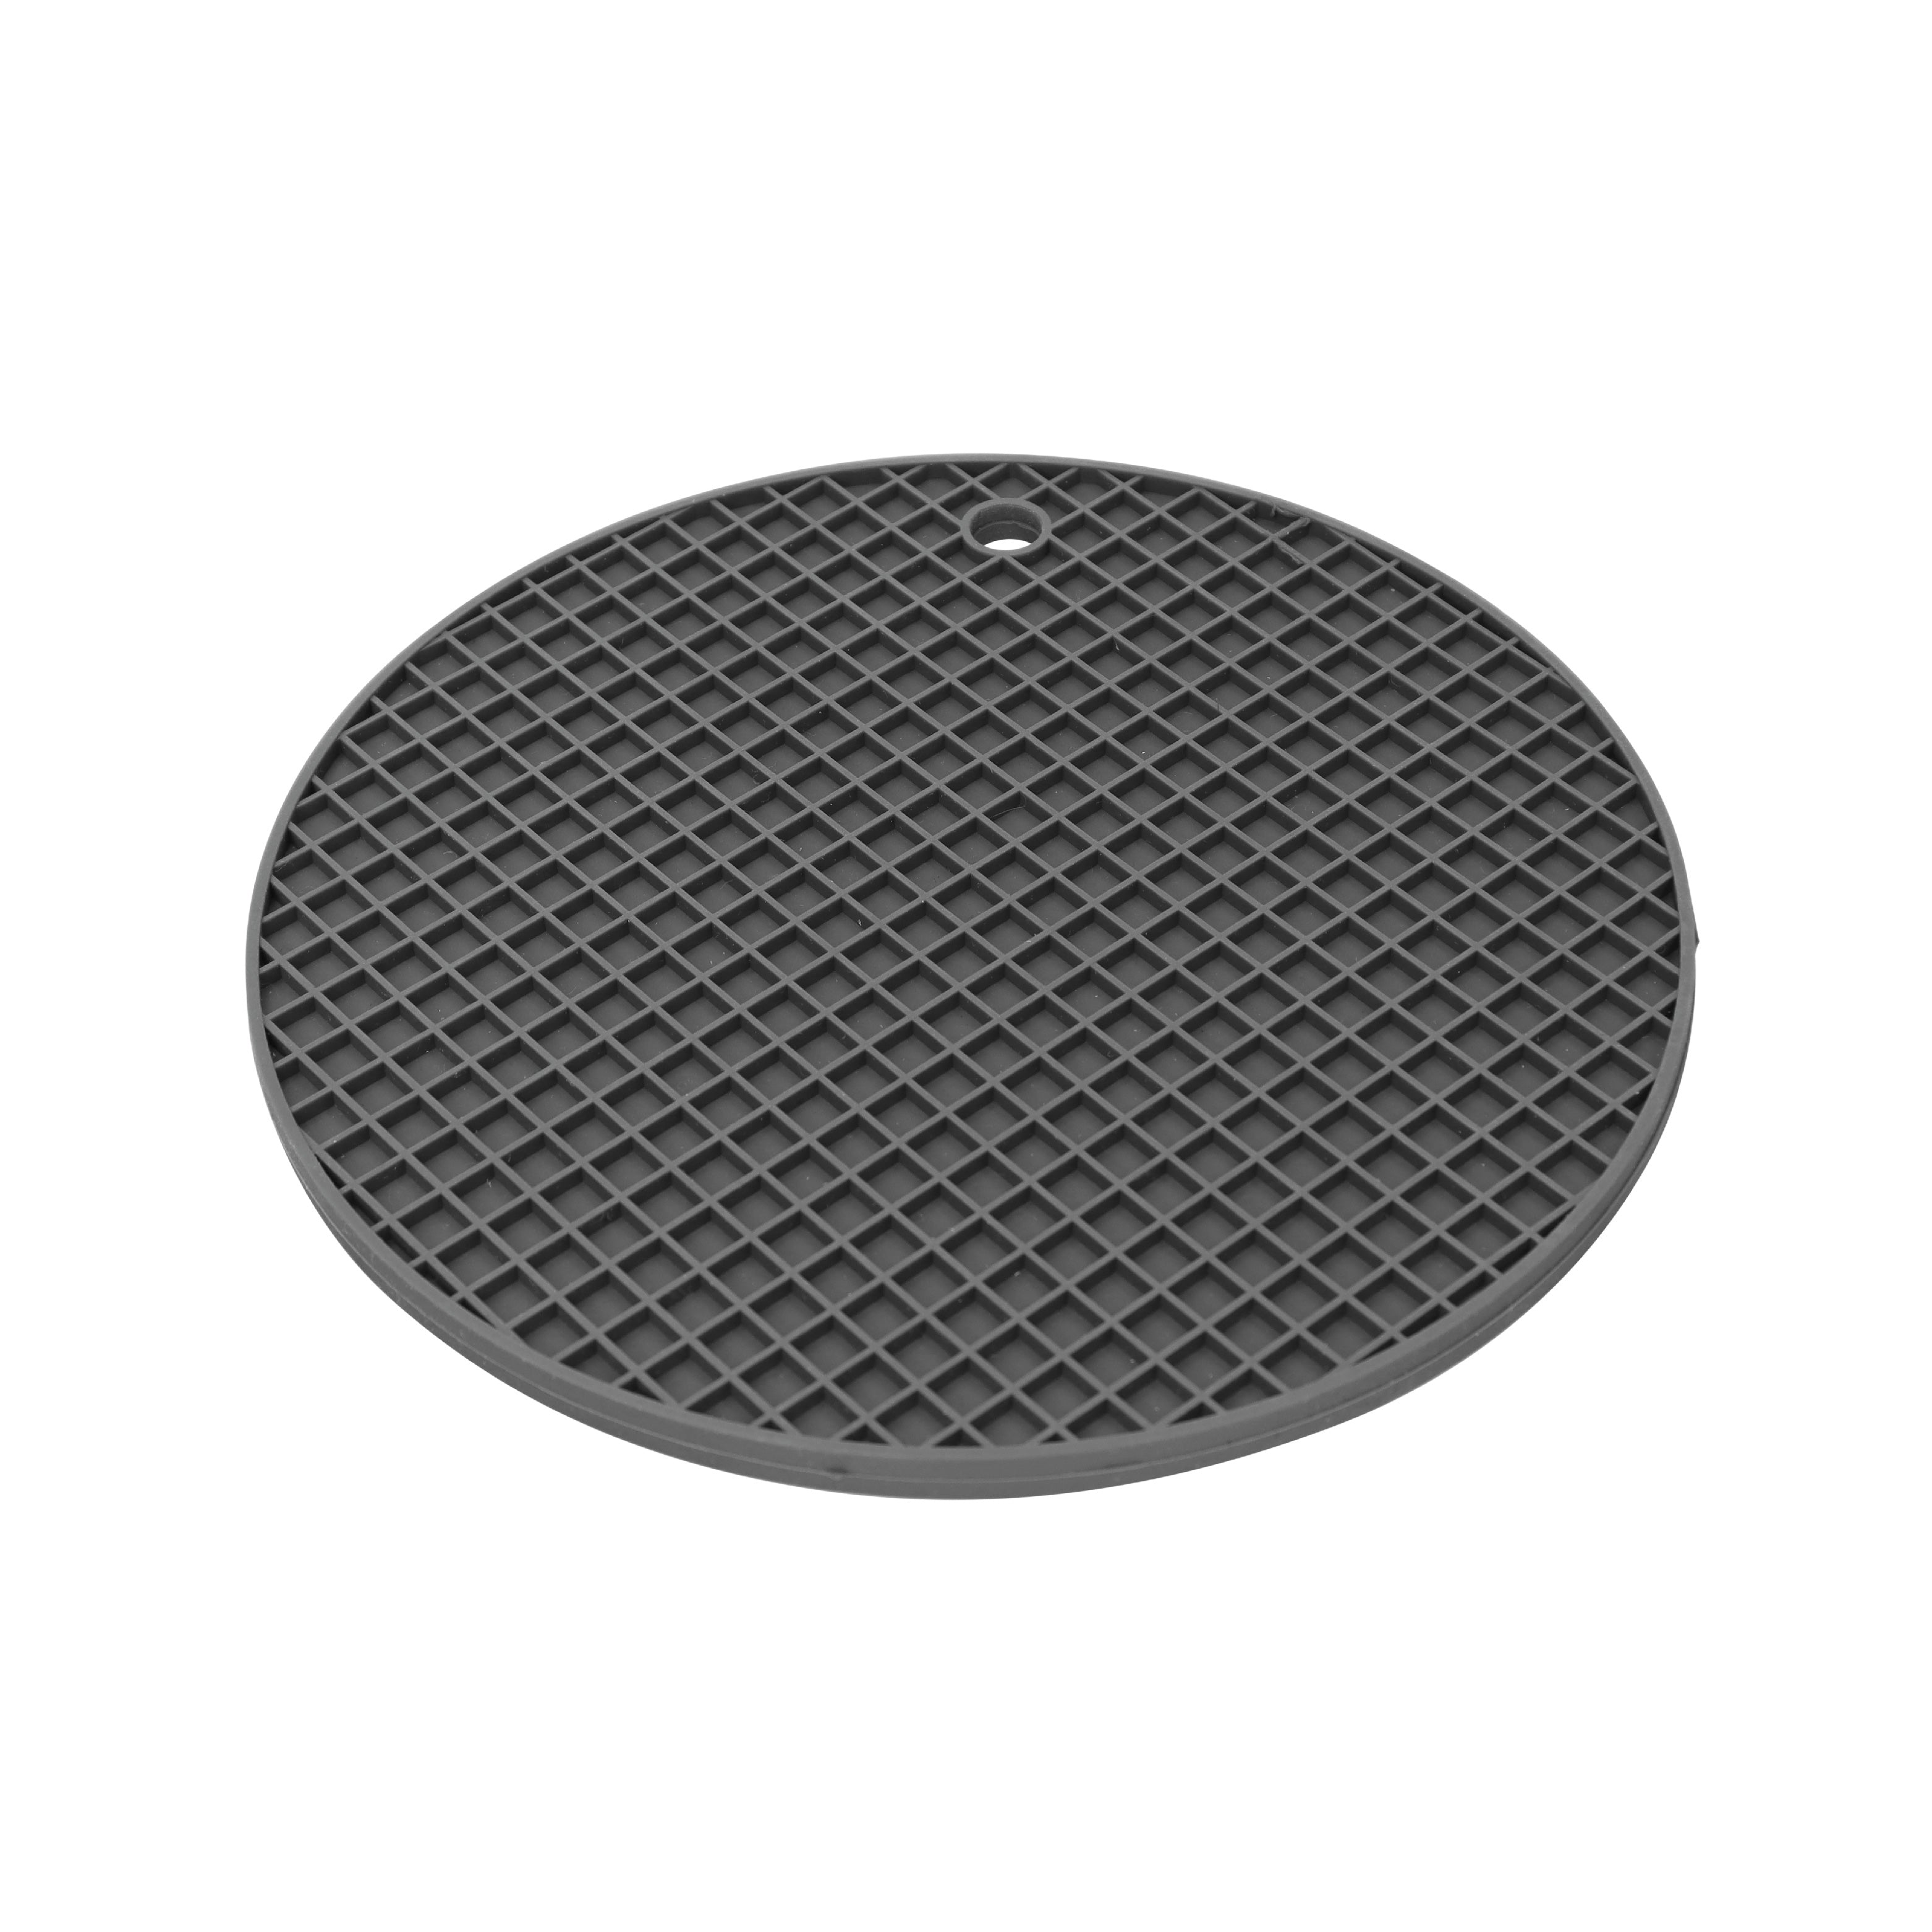 Silicone Trivet Mats – Pot Holders – Drying Mat Our Potholders Kitchen  Tools is Heat Resistant to 440°F, Non-Slip Durable Flexible Easy to wash  and Dry and Contains 4 pcs Gray by